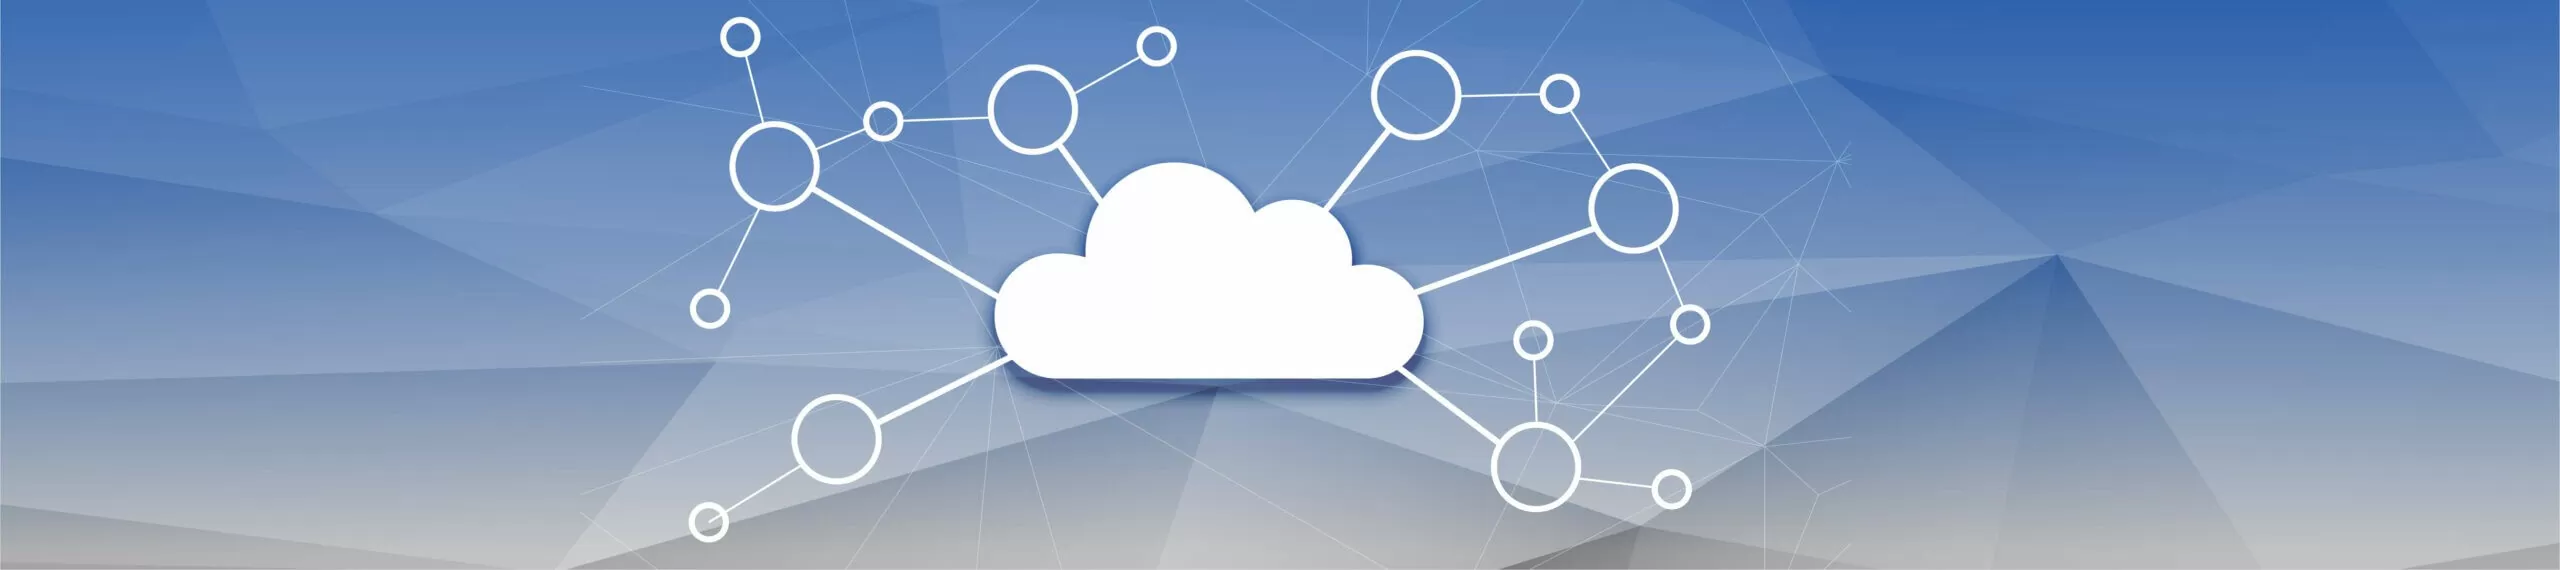 Illustration representing cooperation in cloud services